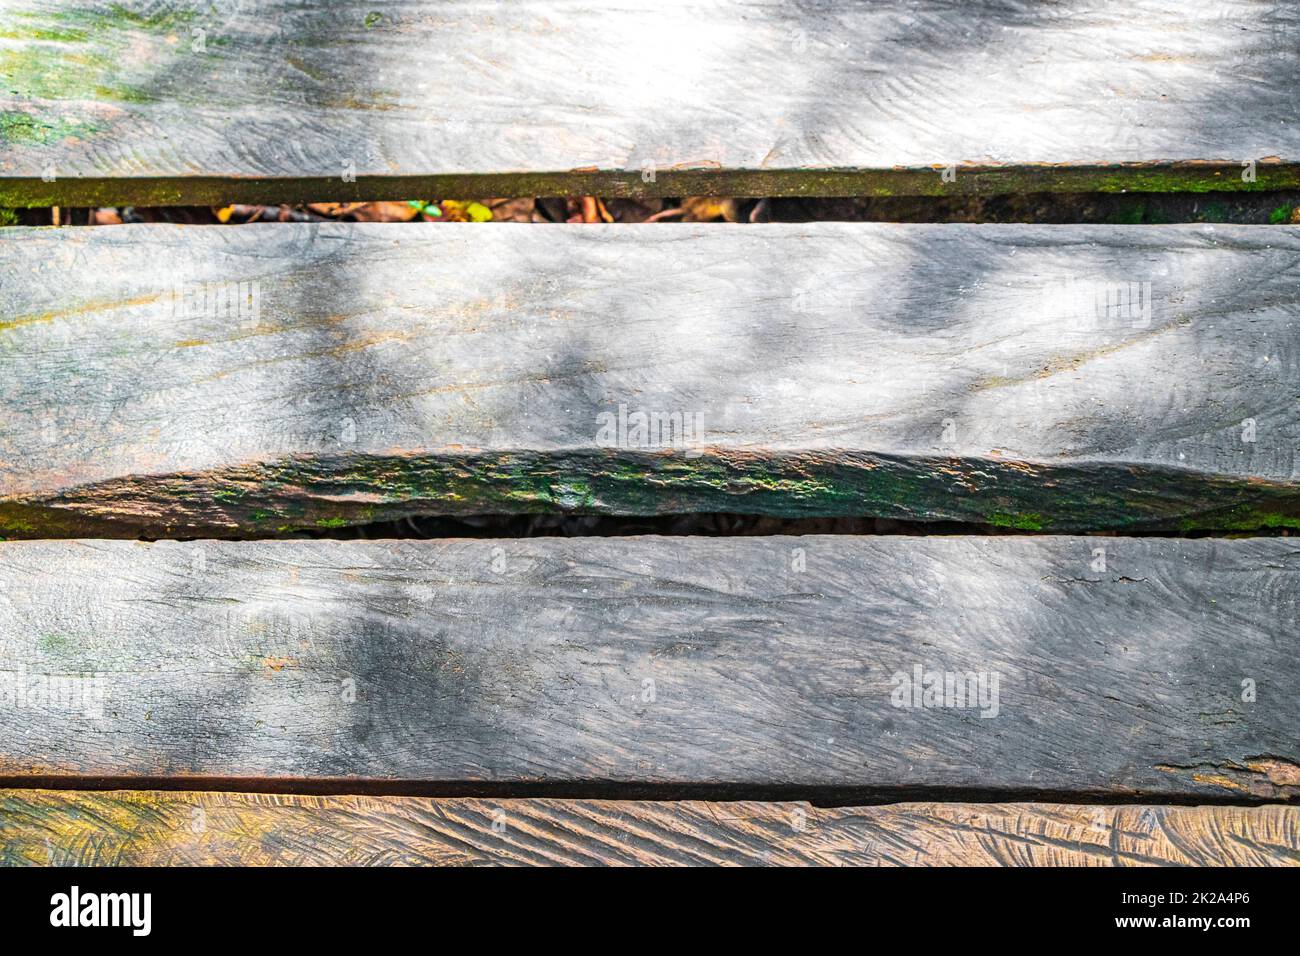 Texture and pattern slats wooden walking trails Sian Kaan Mexico. Stock Photo